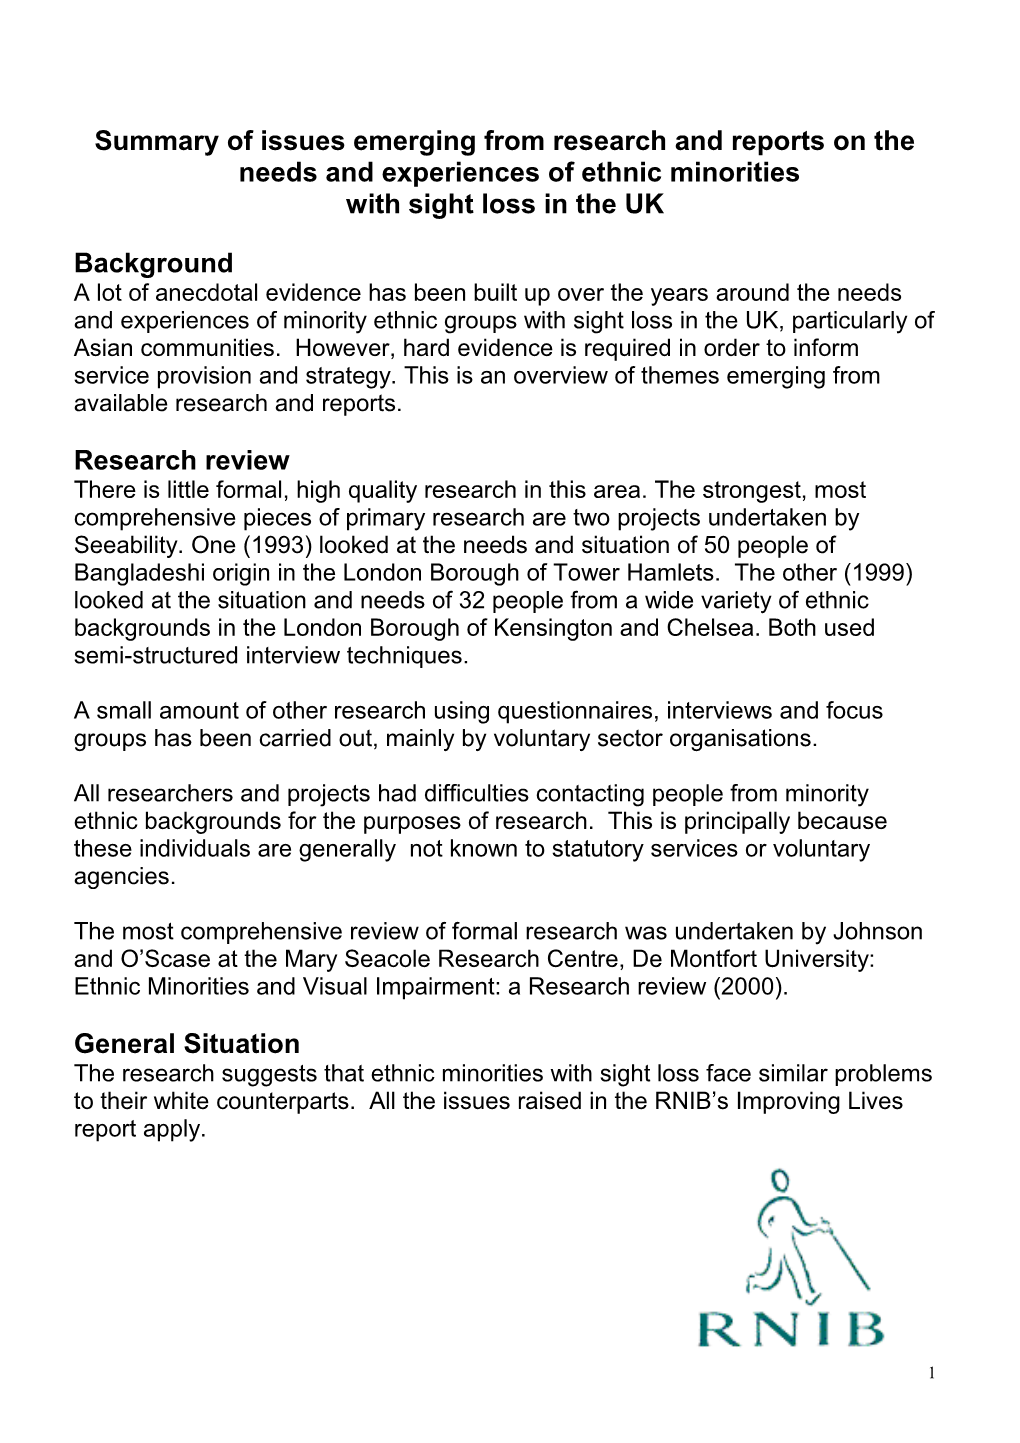 Summary of Specific Research on the Needs of Ethnic Minorities with Sight Loss